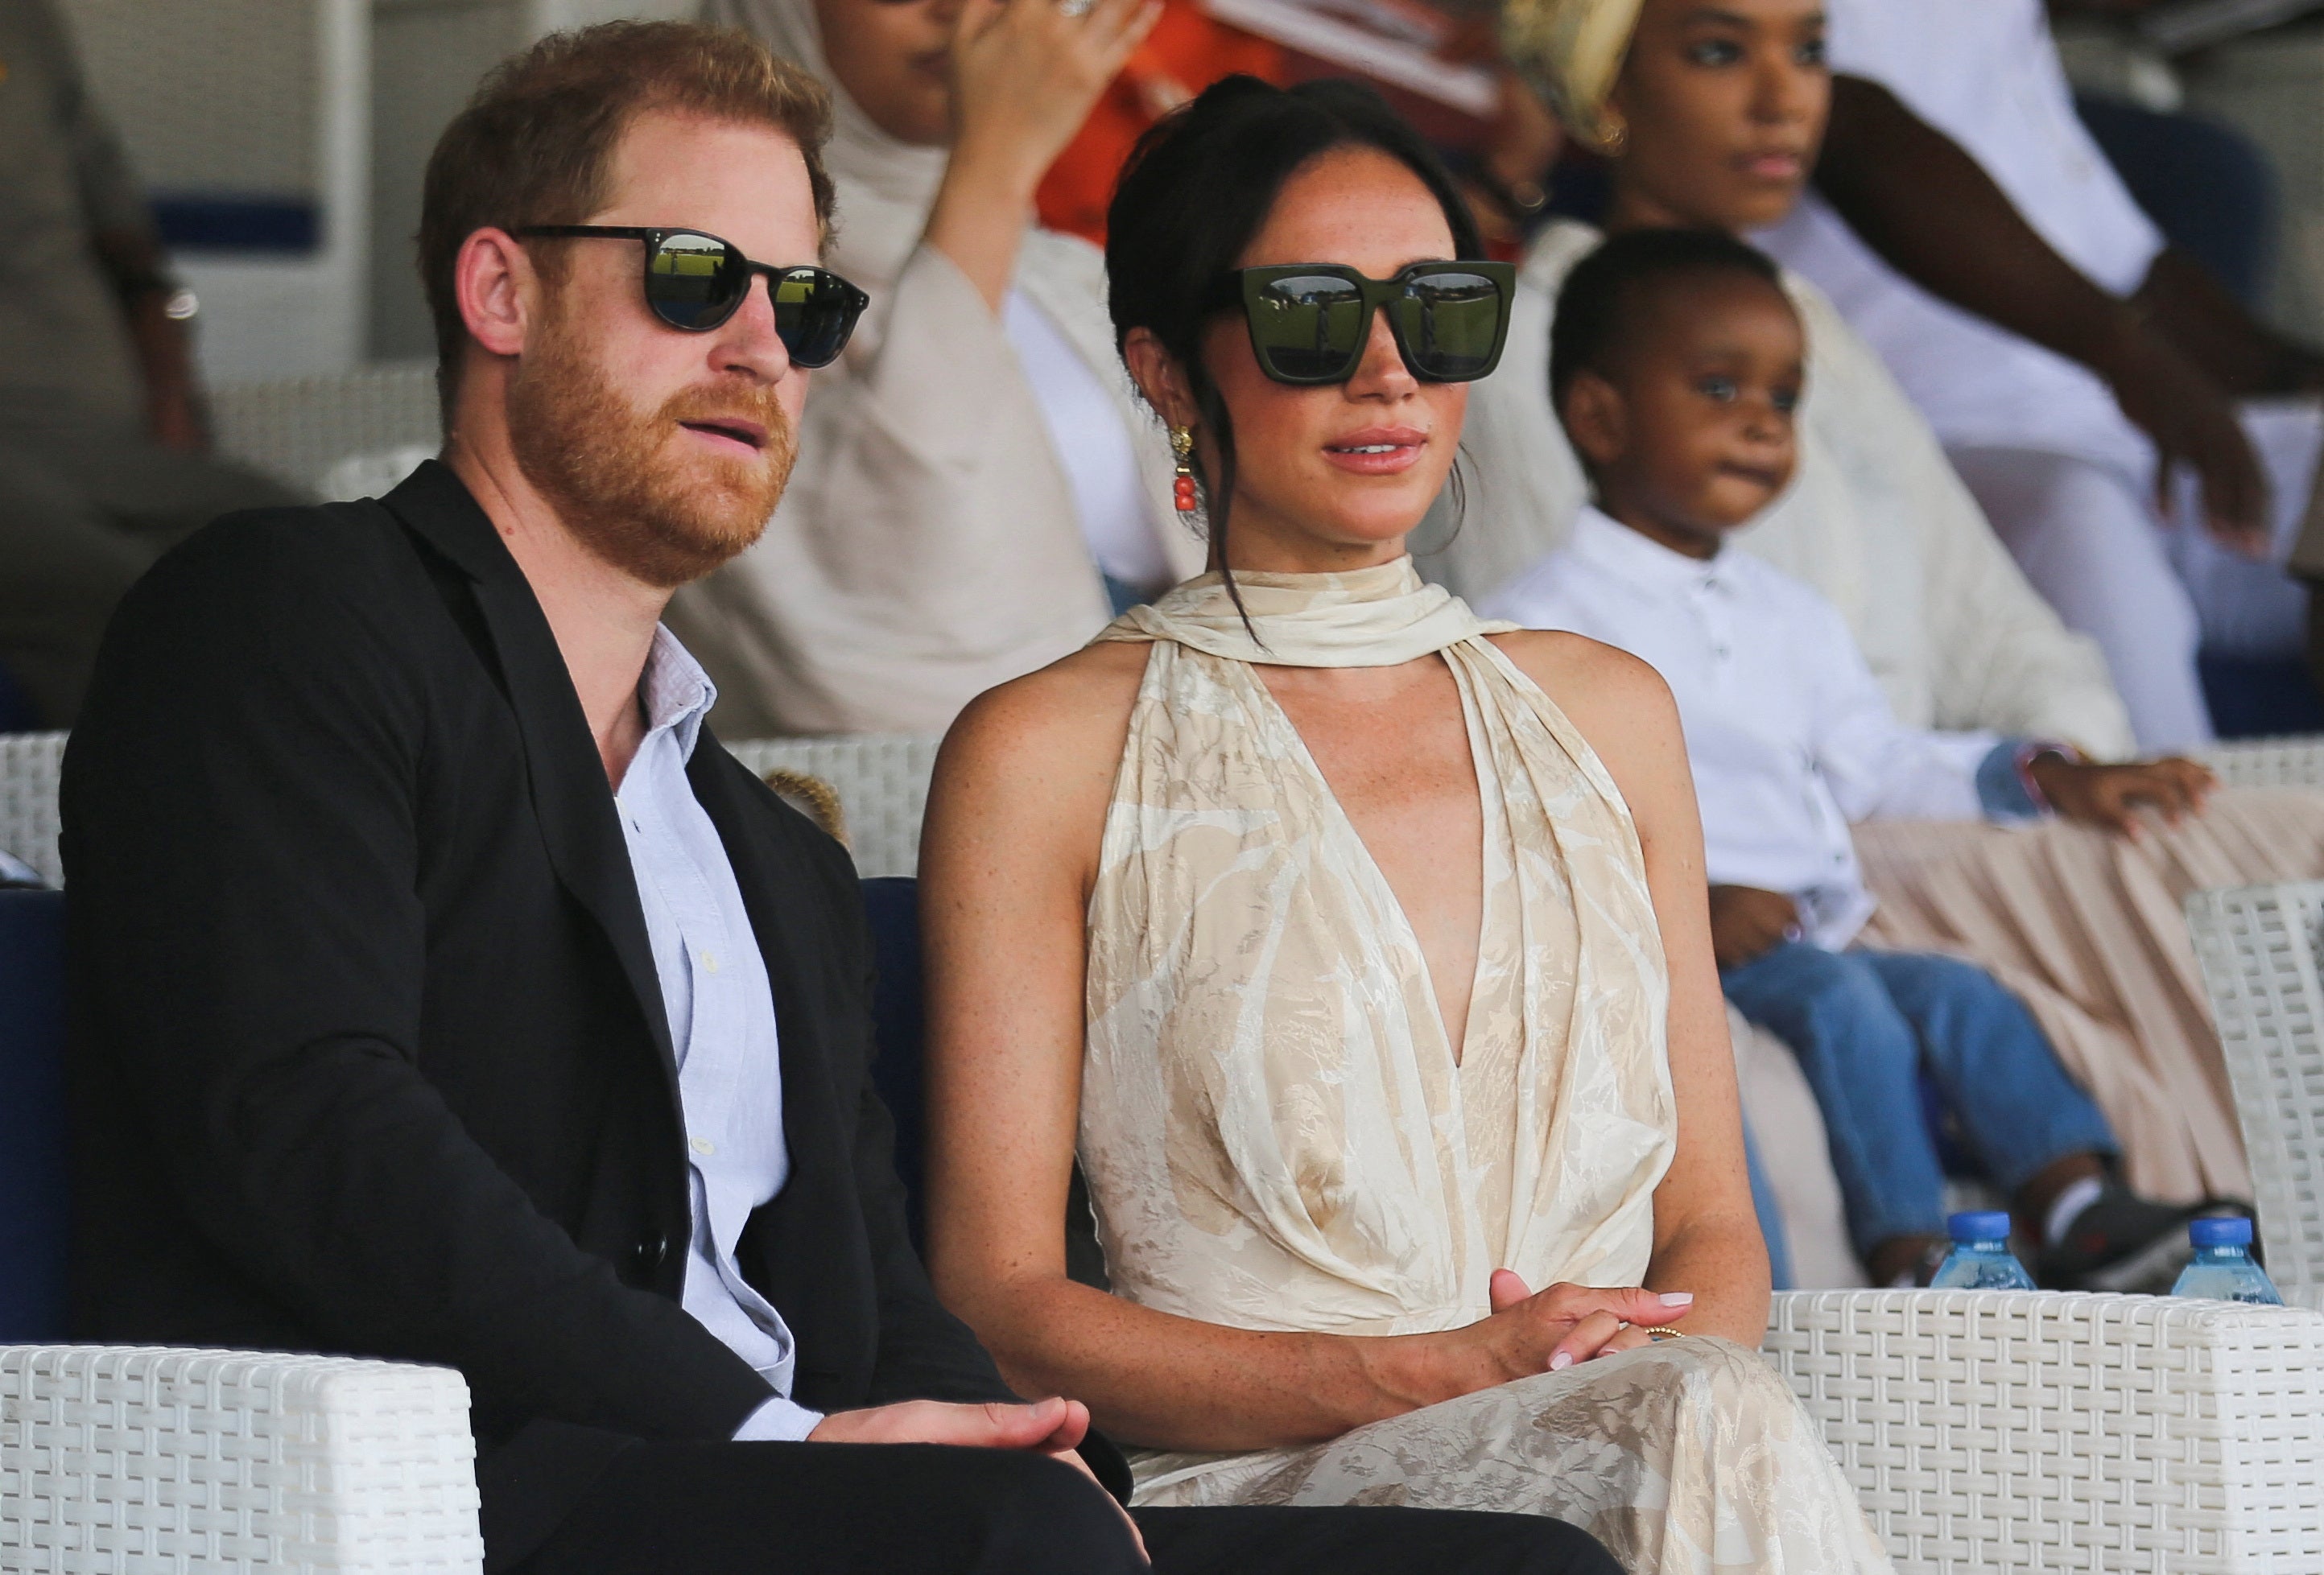 Prince Harry lives in California with his wife Meghan Markle and their two children